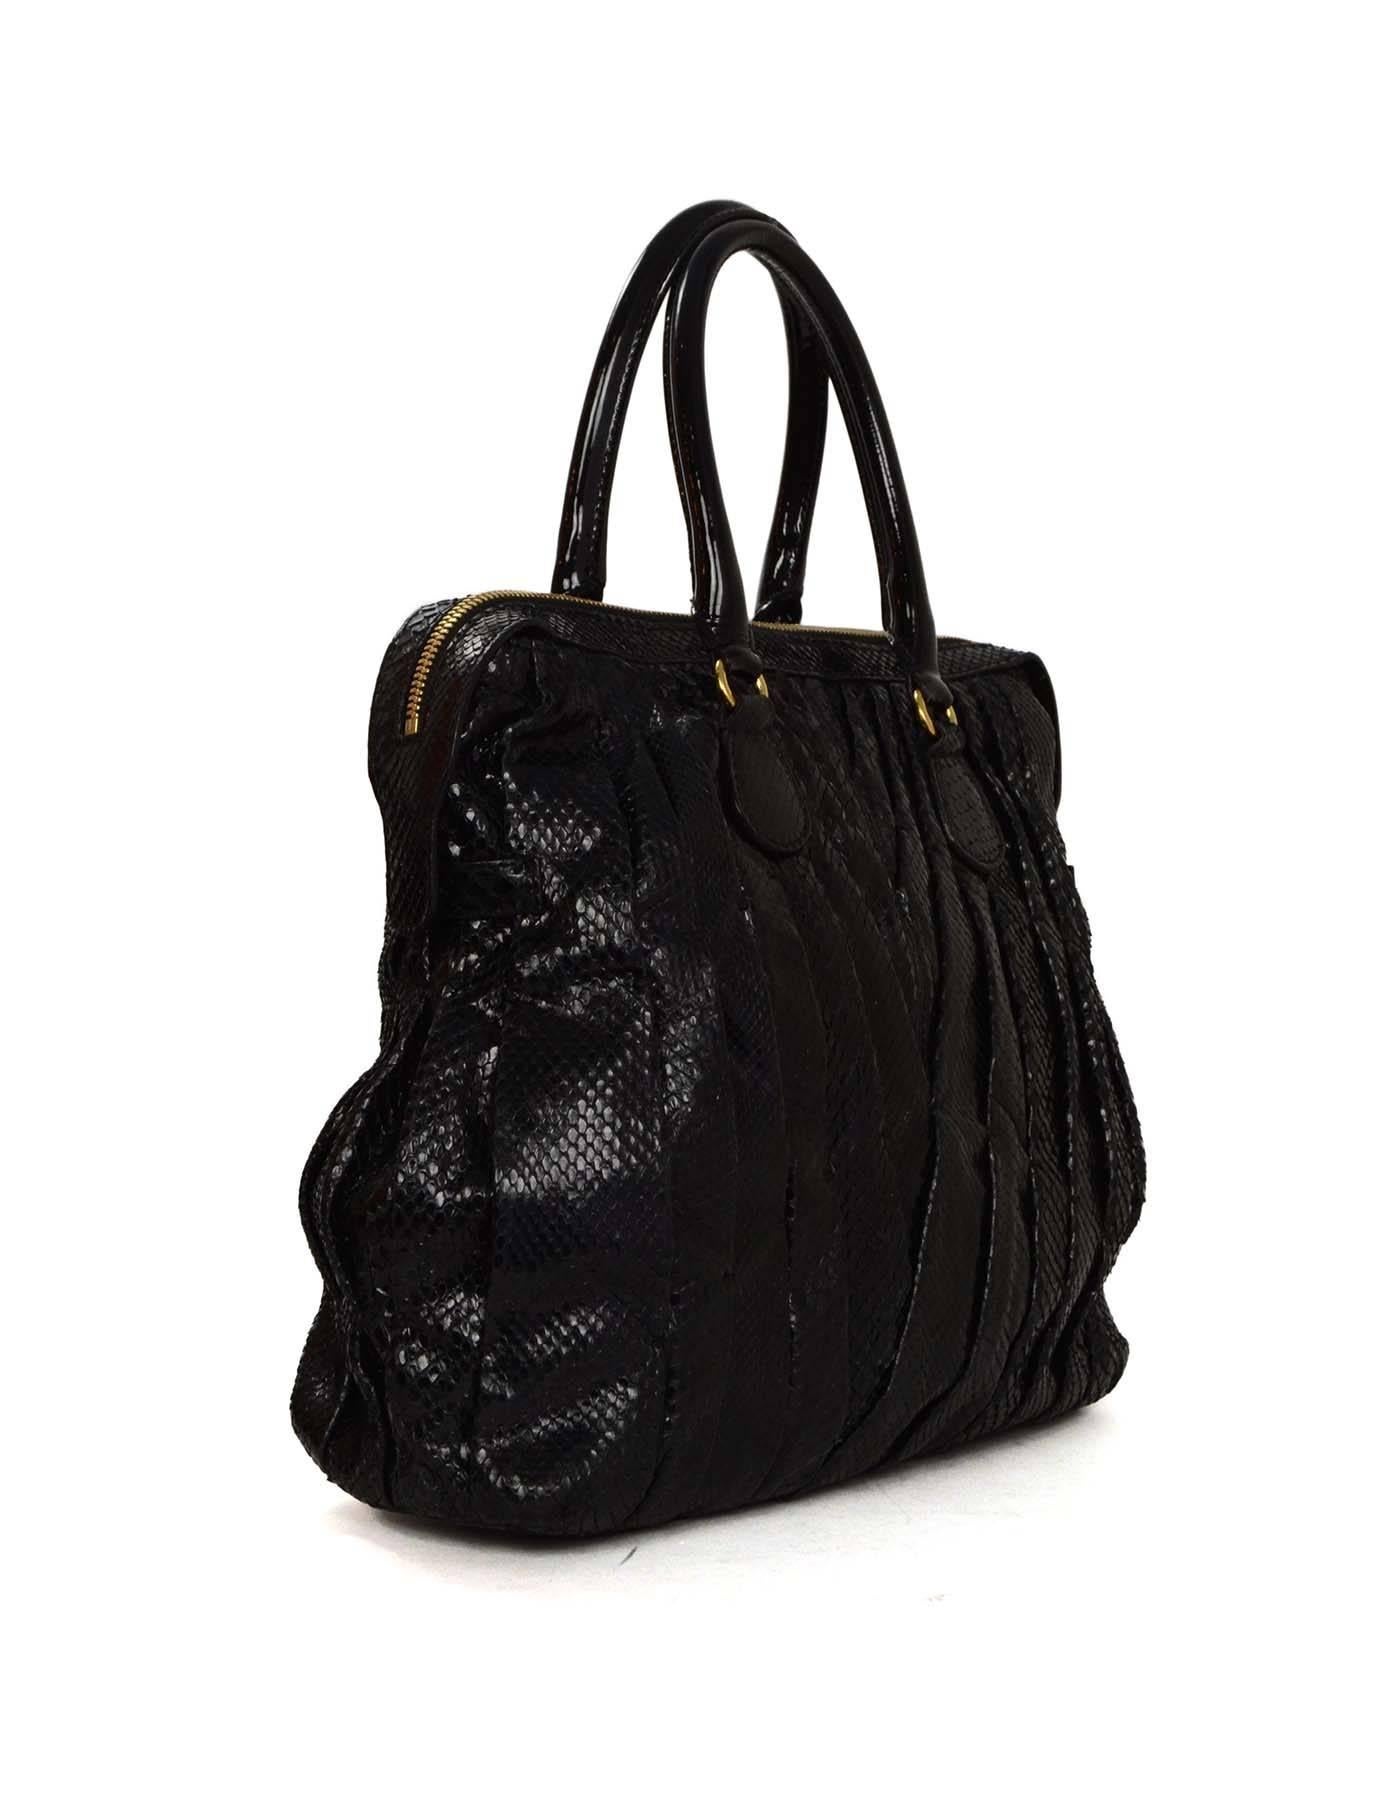 Valentino Black Snakeskin 'Maison Pintucked' Tote 
Features black patent leather wrapped handles

Made In: Italy
Color: Black
Hardware: Goldtone
Materials: Snakeskin
Lining: Red satin
Closure/Opening: Double zip across top
Exterior Pockets: